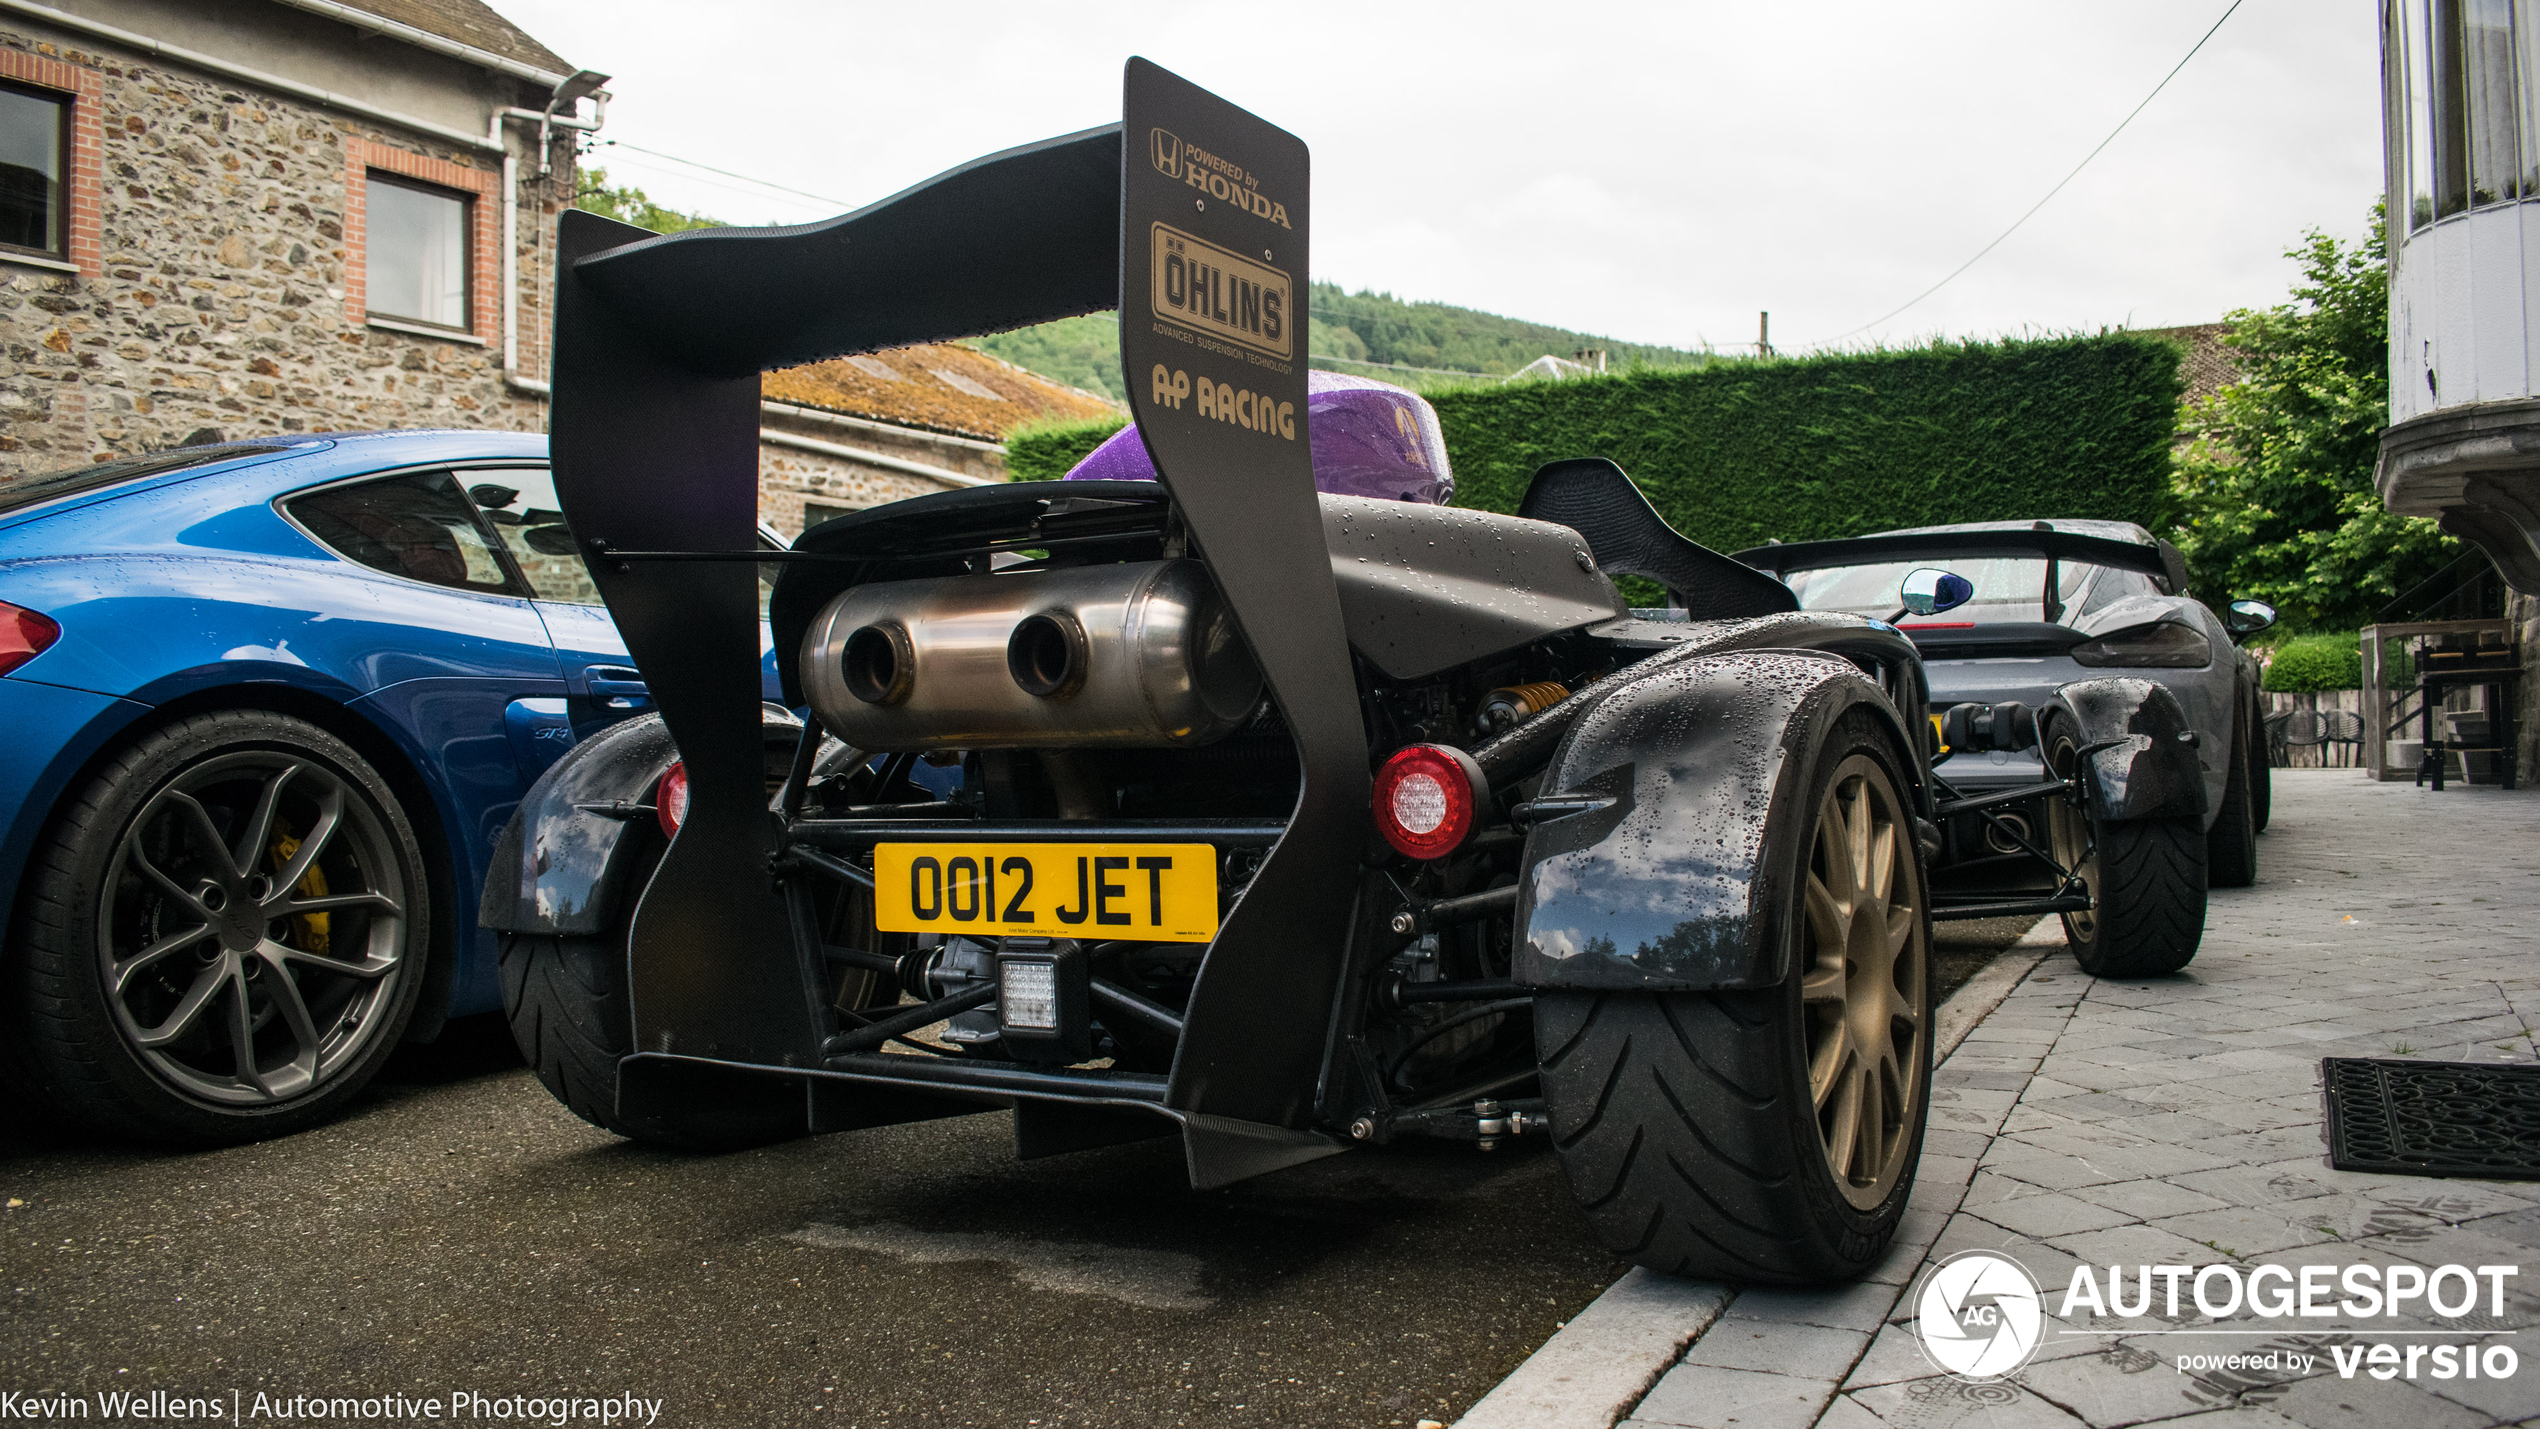 A purple Ariel Atom 4 shows up in Coo